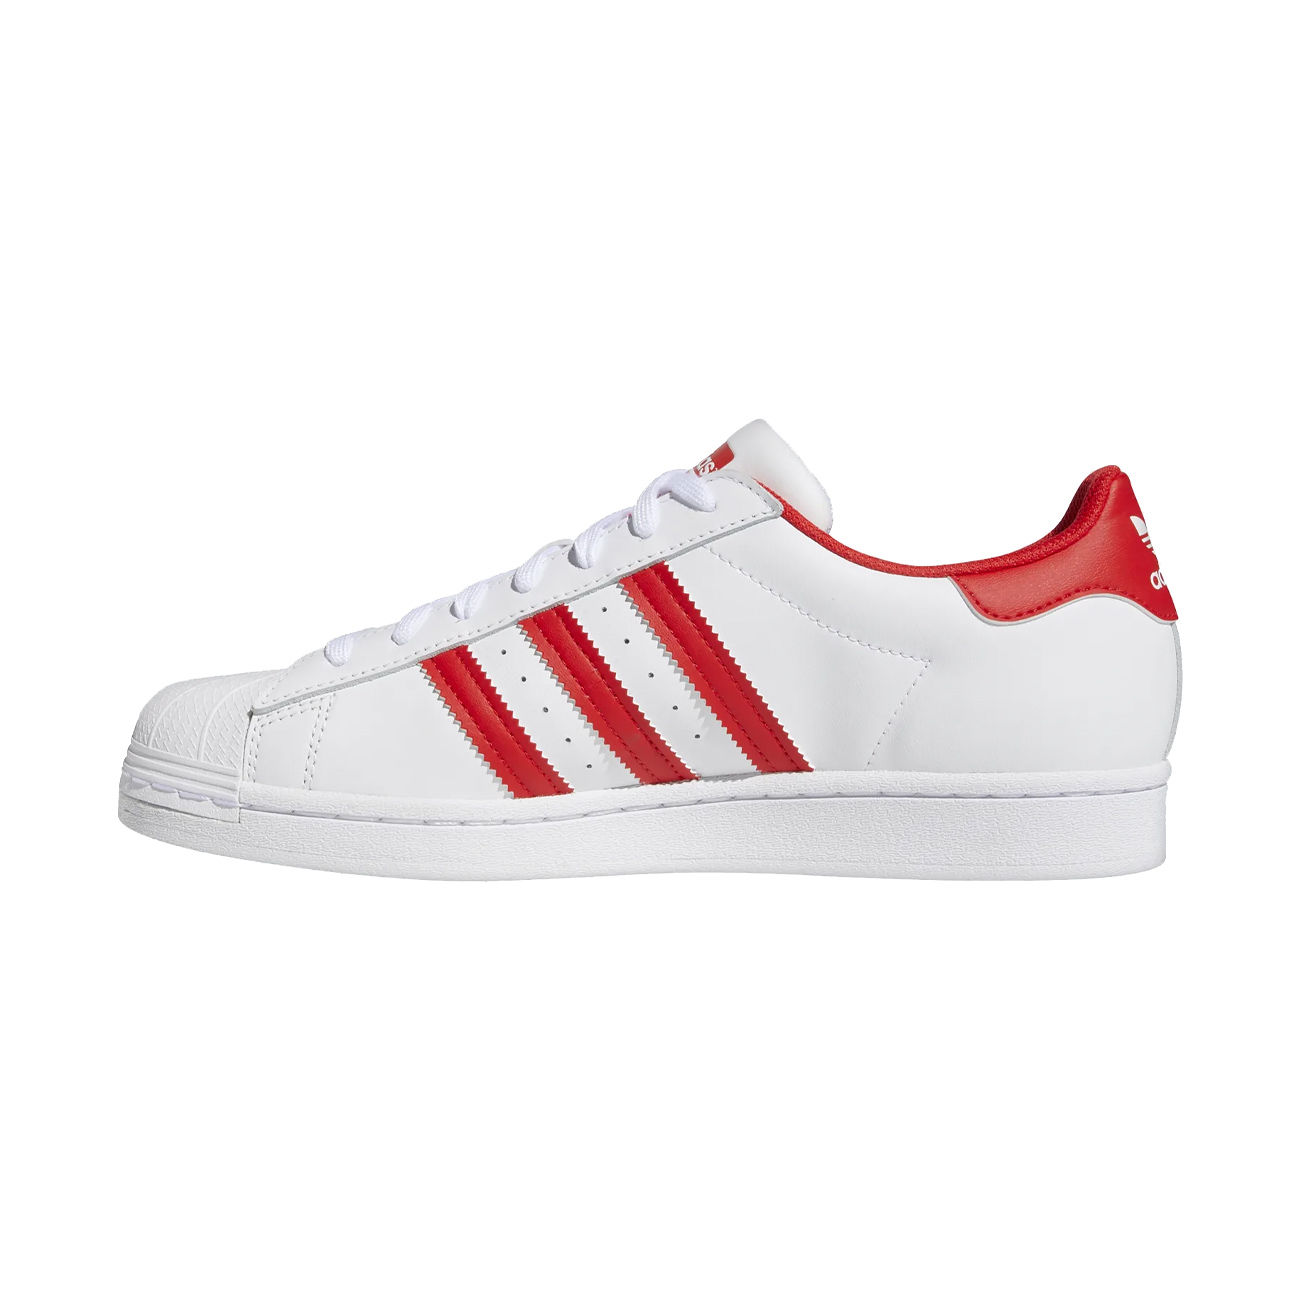 ADIDAS SNEAKER IN LEATHER Man White Red | Mascheroni Store